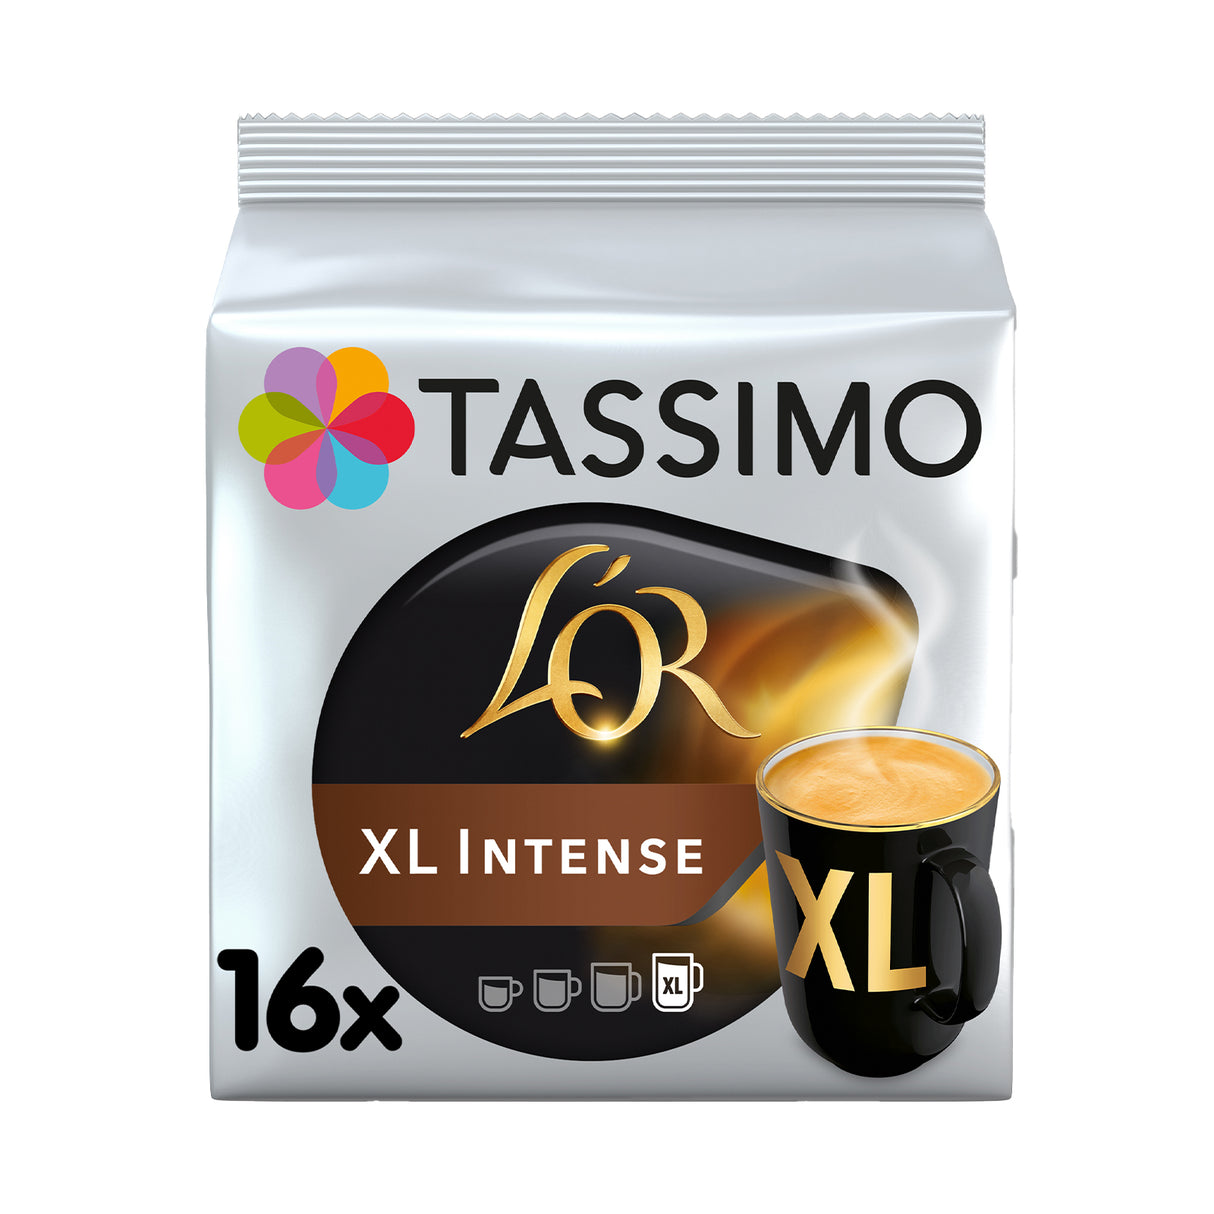 Tassimo T Discs L'OR XL Intense Packet